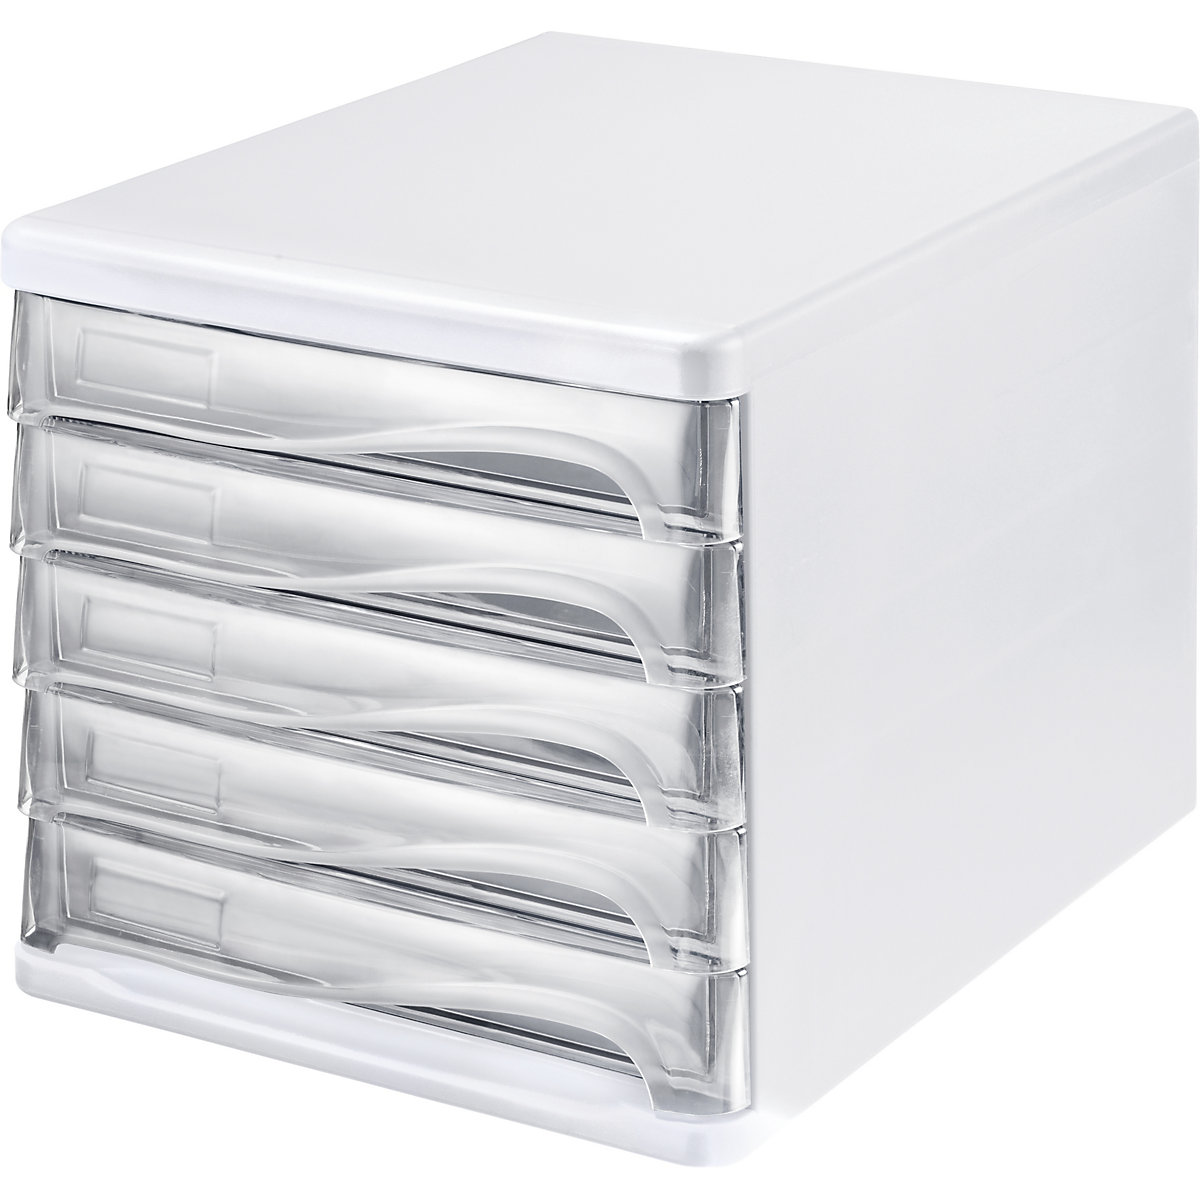 Drawer box – helit, housing colour white, pack of 4, transparent drawers-4